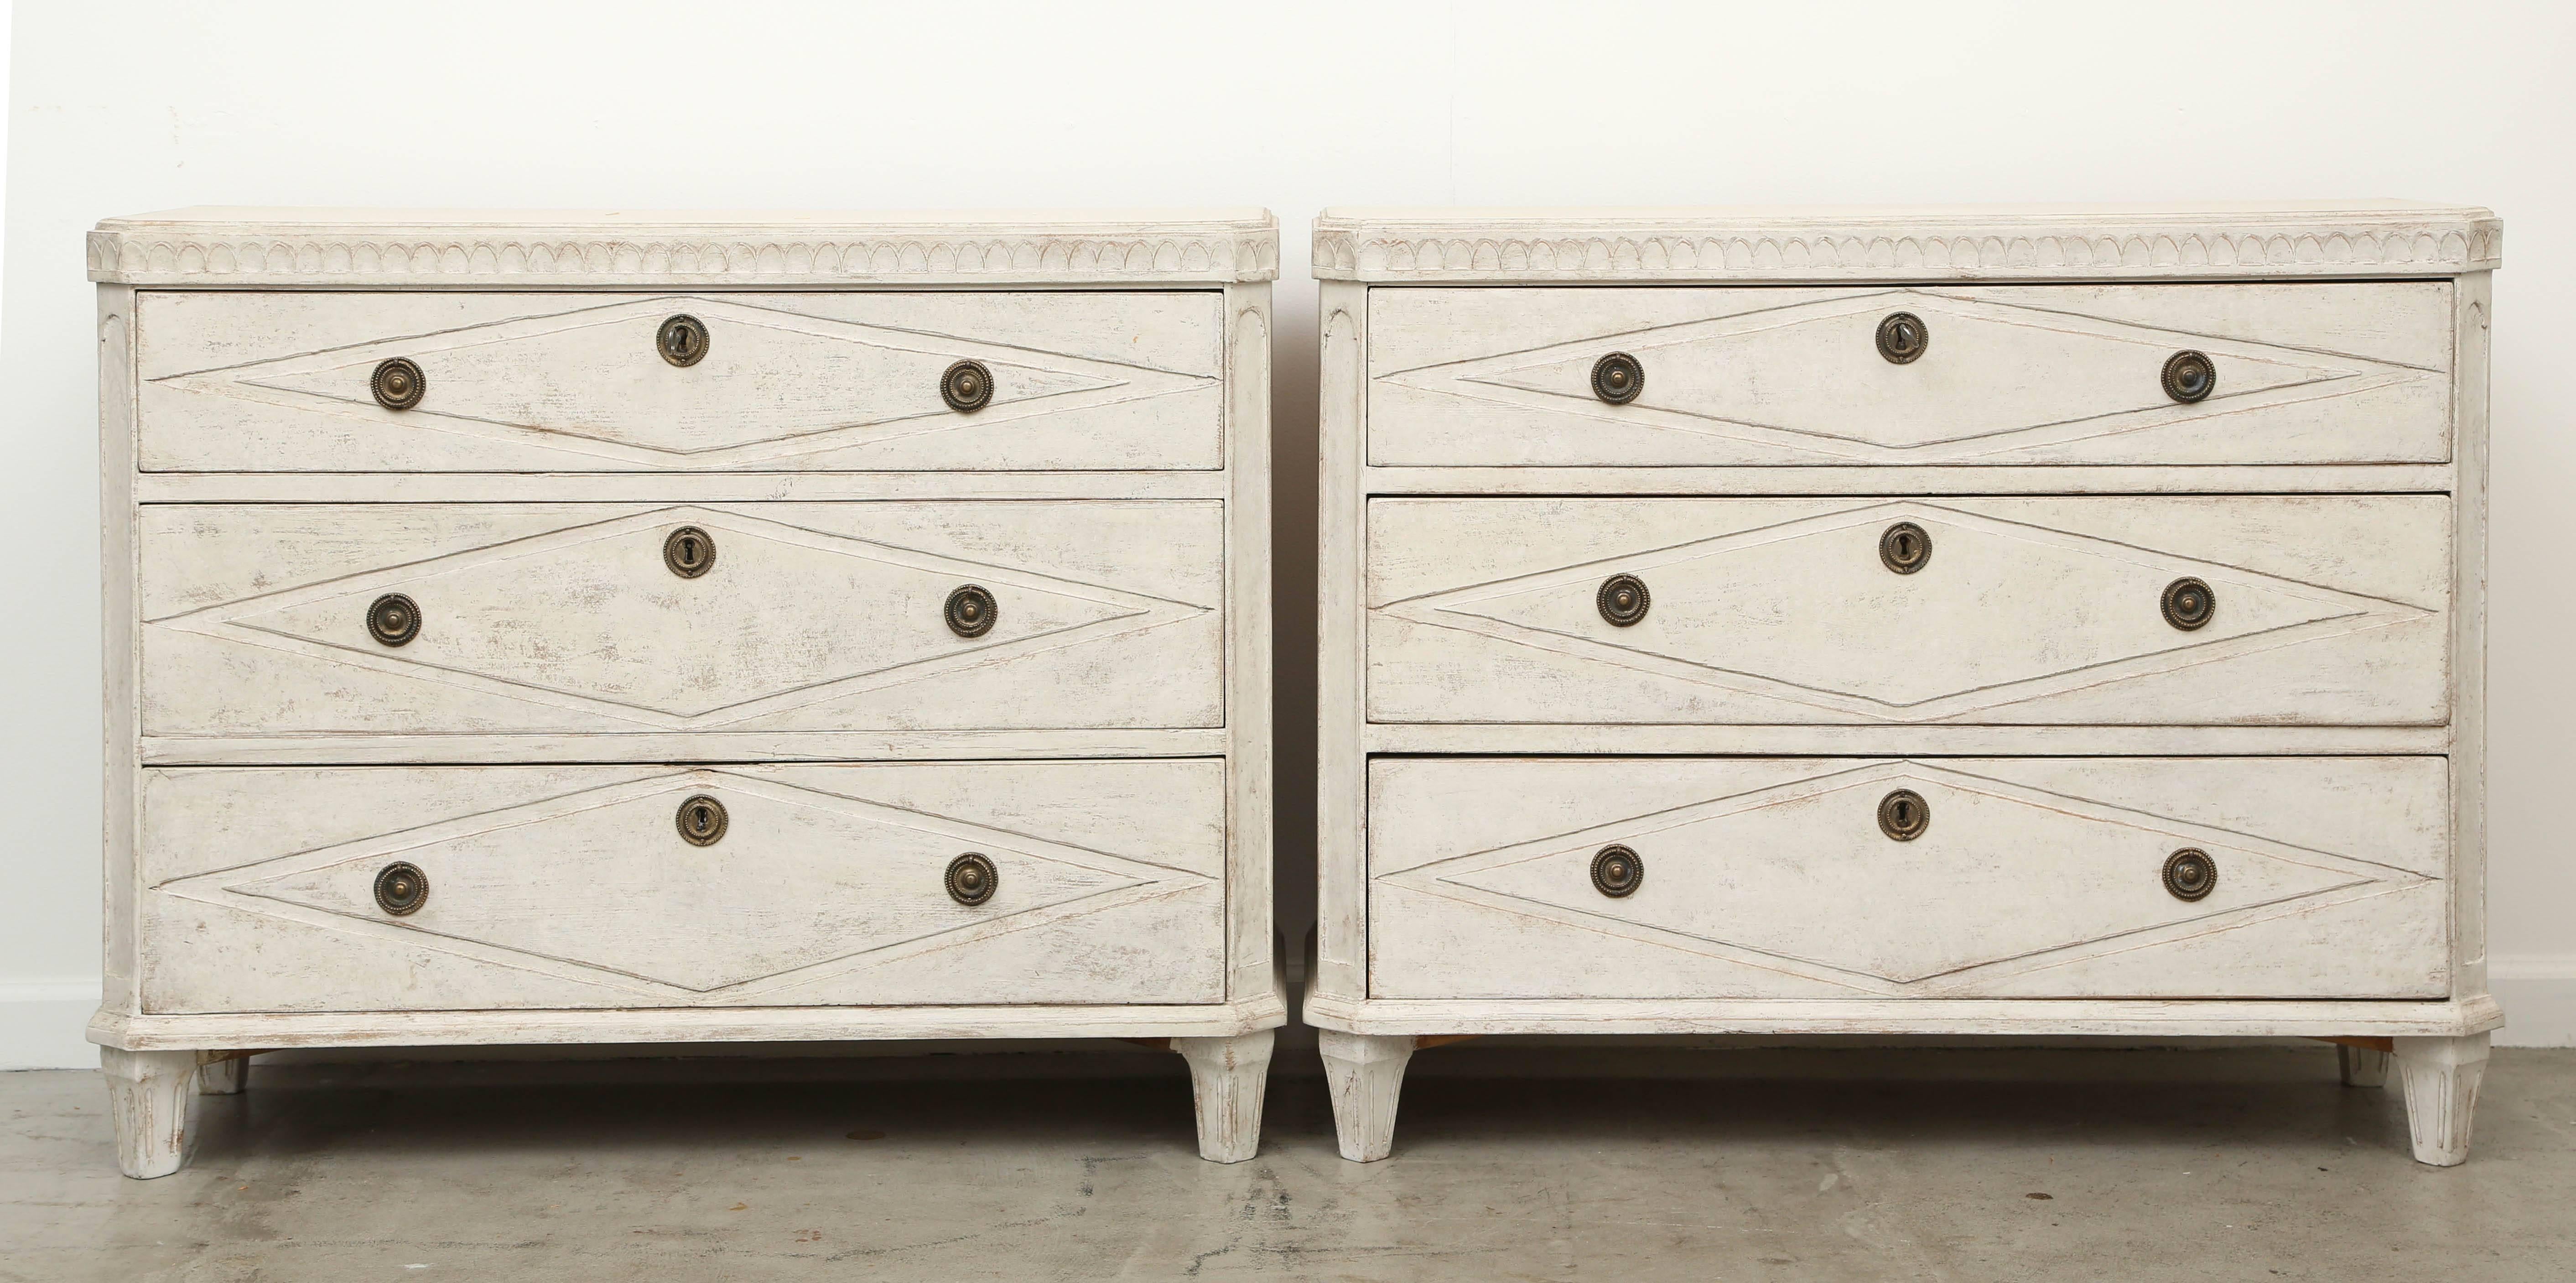 Large Pair of antique Swedish Gustavian chests diamond carving mid-19th century.
Three drawer chests with lambs tongue border around the top, drawers have diamond carved raised panel detail, cut corners, squared fluted legs, brass hardware and